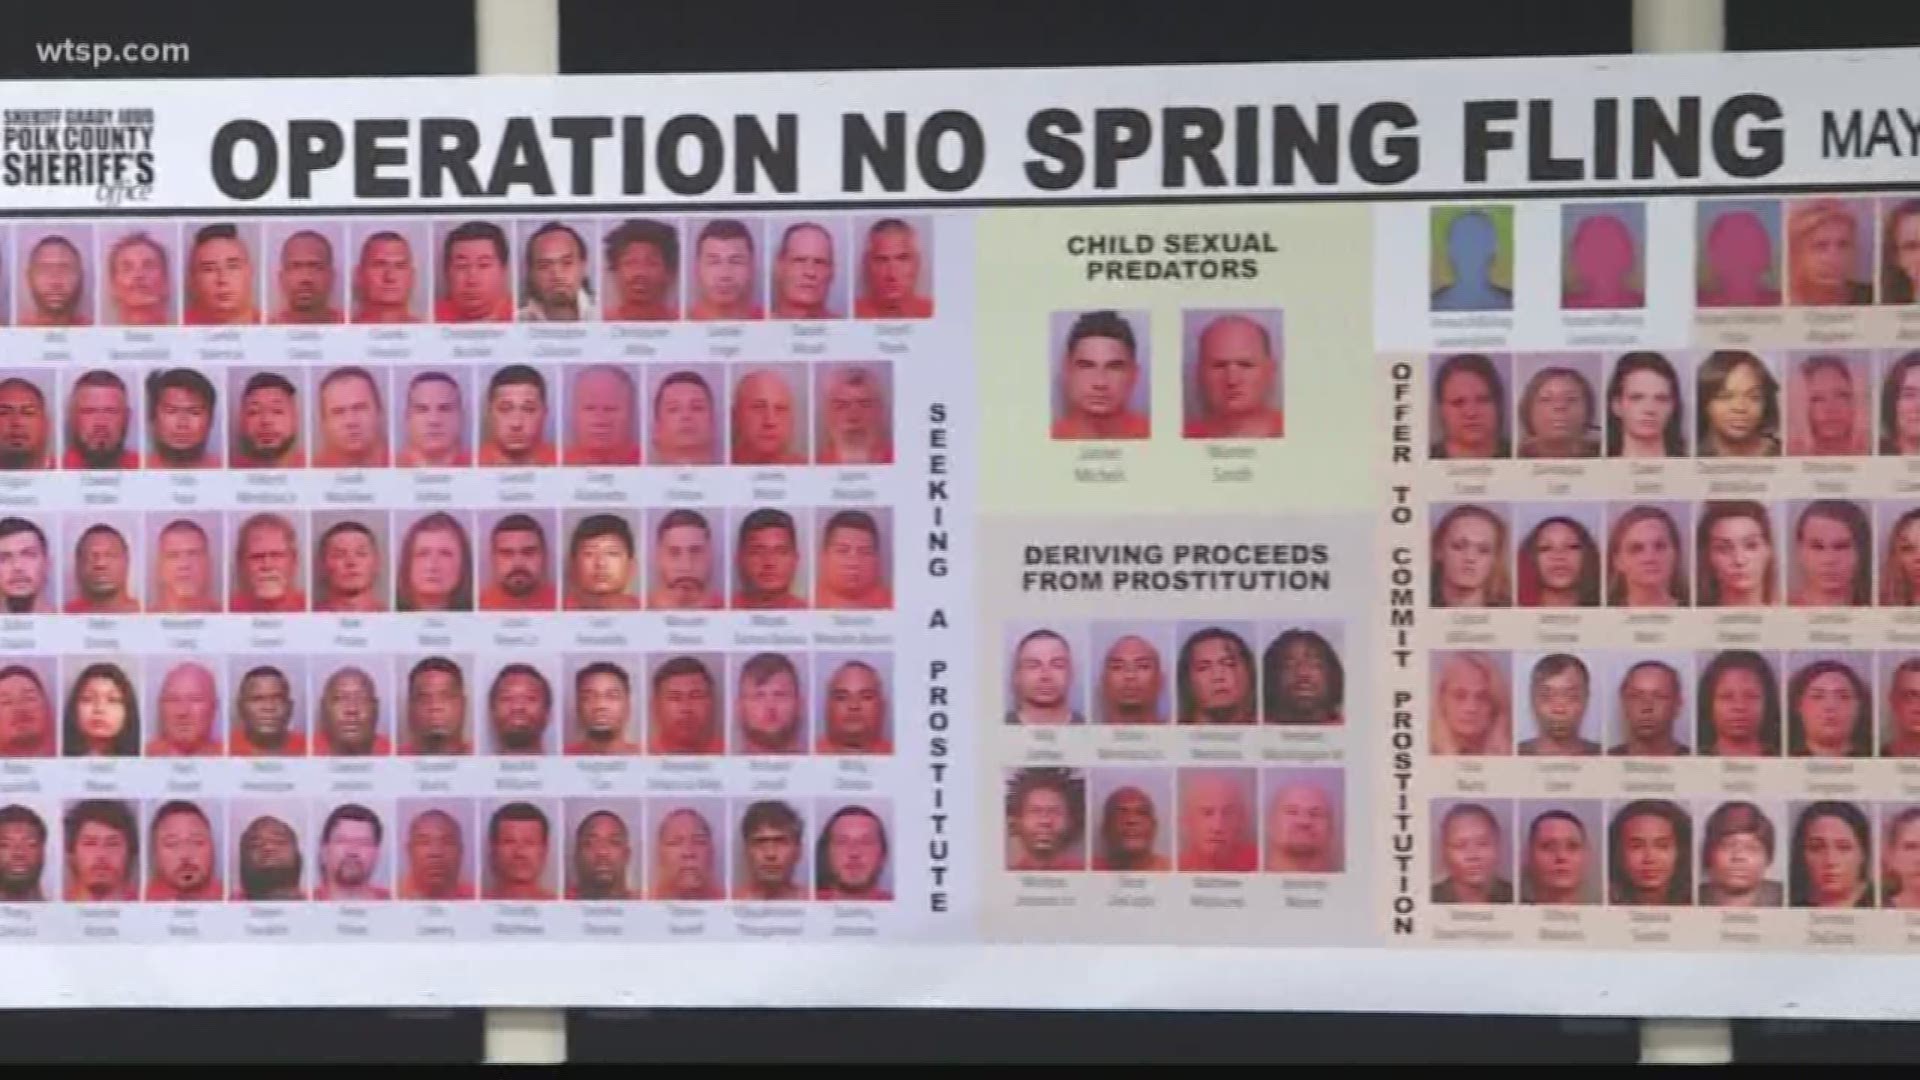 More than 150 people were arrested as part of a six-day sting in Polk County.

Sheriff Grady Judd said the sting was to help detectives identify victims of human trafficking in prostitution. The operation started on May 14 and resulted in 154 arrests.

In a news release, the sheriff's office said a 17-year-old girl and a 23-year-old woman had been identified as possible victims of human trafficking. A 17-year-old boy is also being considered a victim of human trafficking.

The sheriff's office said it worked with local law enforcement in Lakeland, Winter Haven and Haines City for "Operation No Spring Fling."